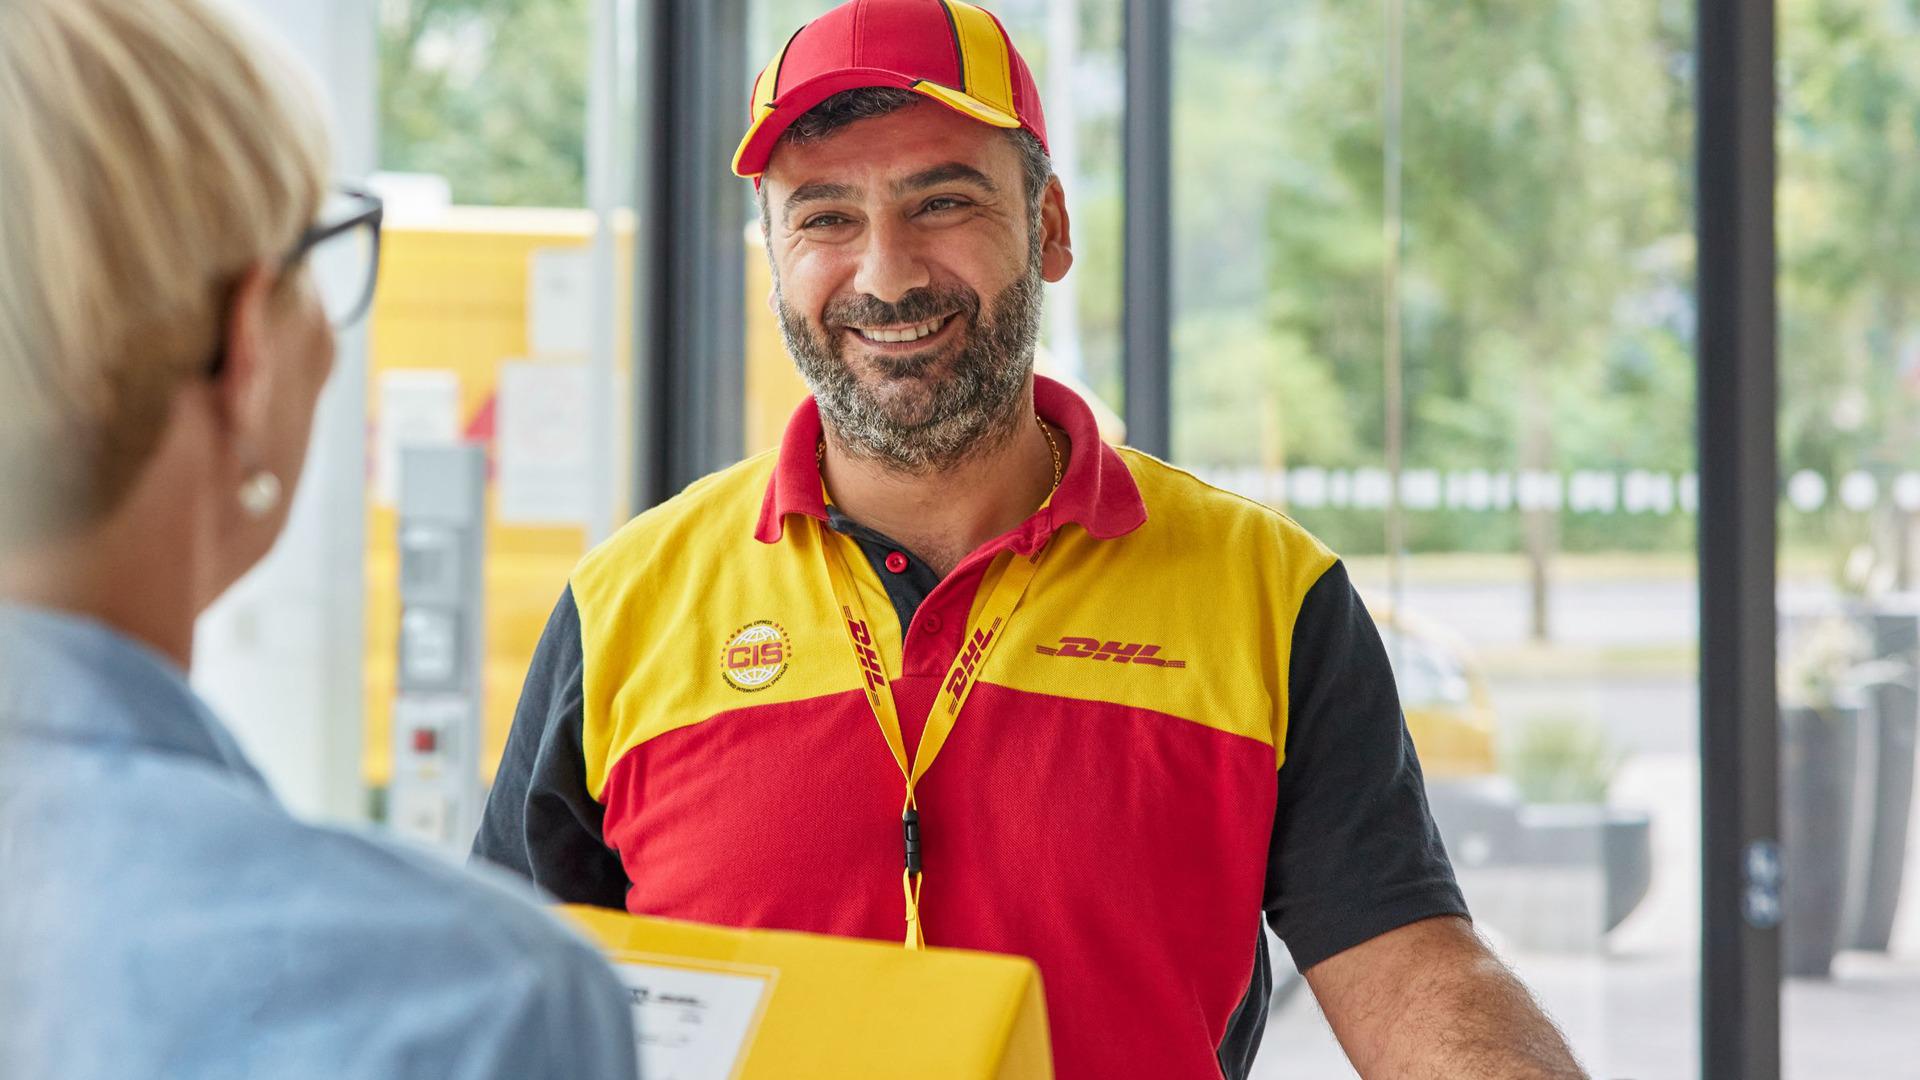 DHL Express London North East